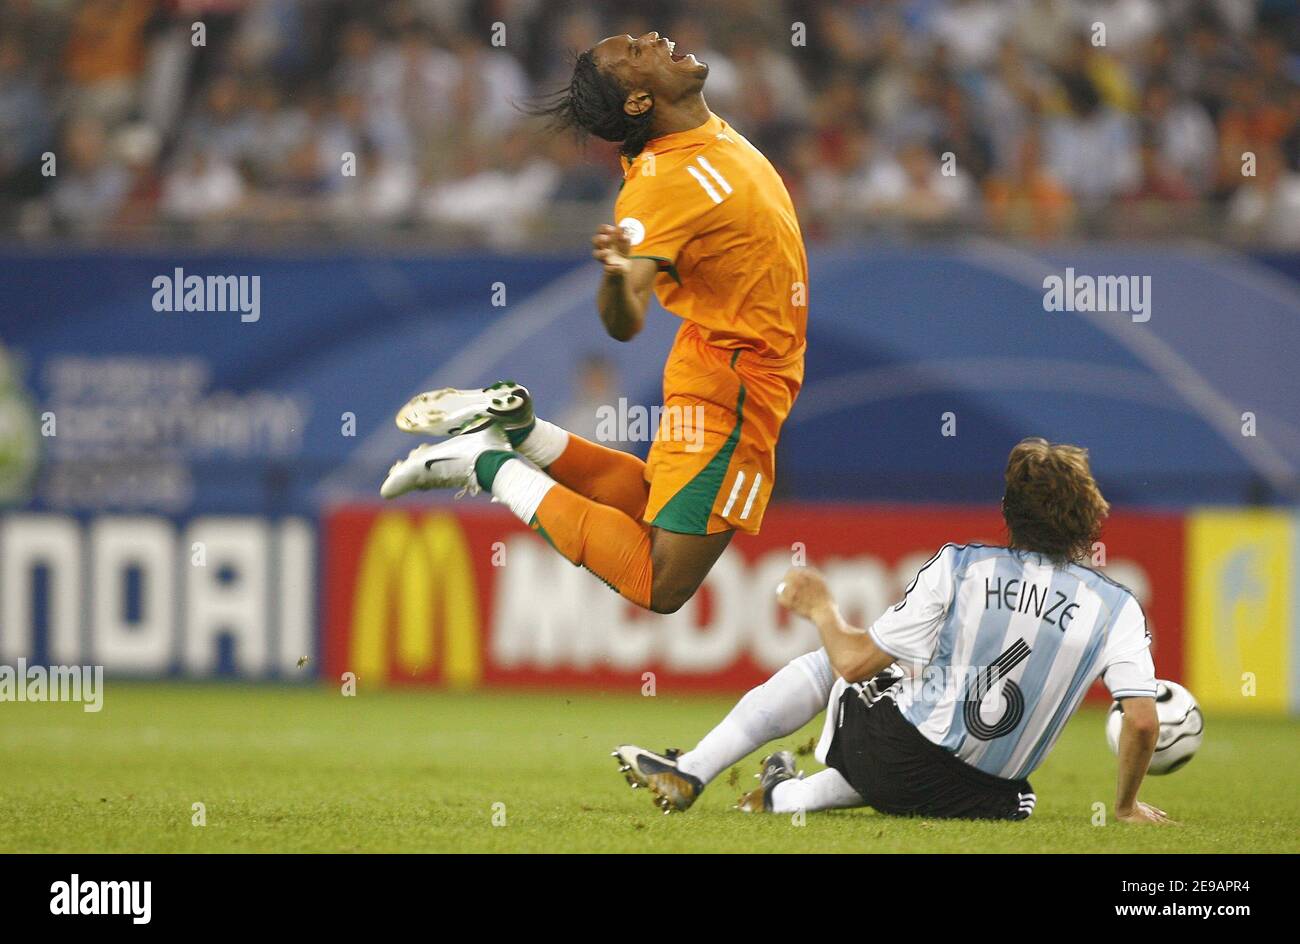 Ivory Coast's Didier Drogba and Argentina's Gabriel Heinze during the World Cup 2006, World Cup 2006, Group C, Argentina vs Ivory Coast in Hamburg, Germany on June 10, 2006. Argentina won 2-1. Photo by Christian Liewig/ABACAPRESS.COM Stock Photo